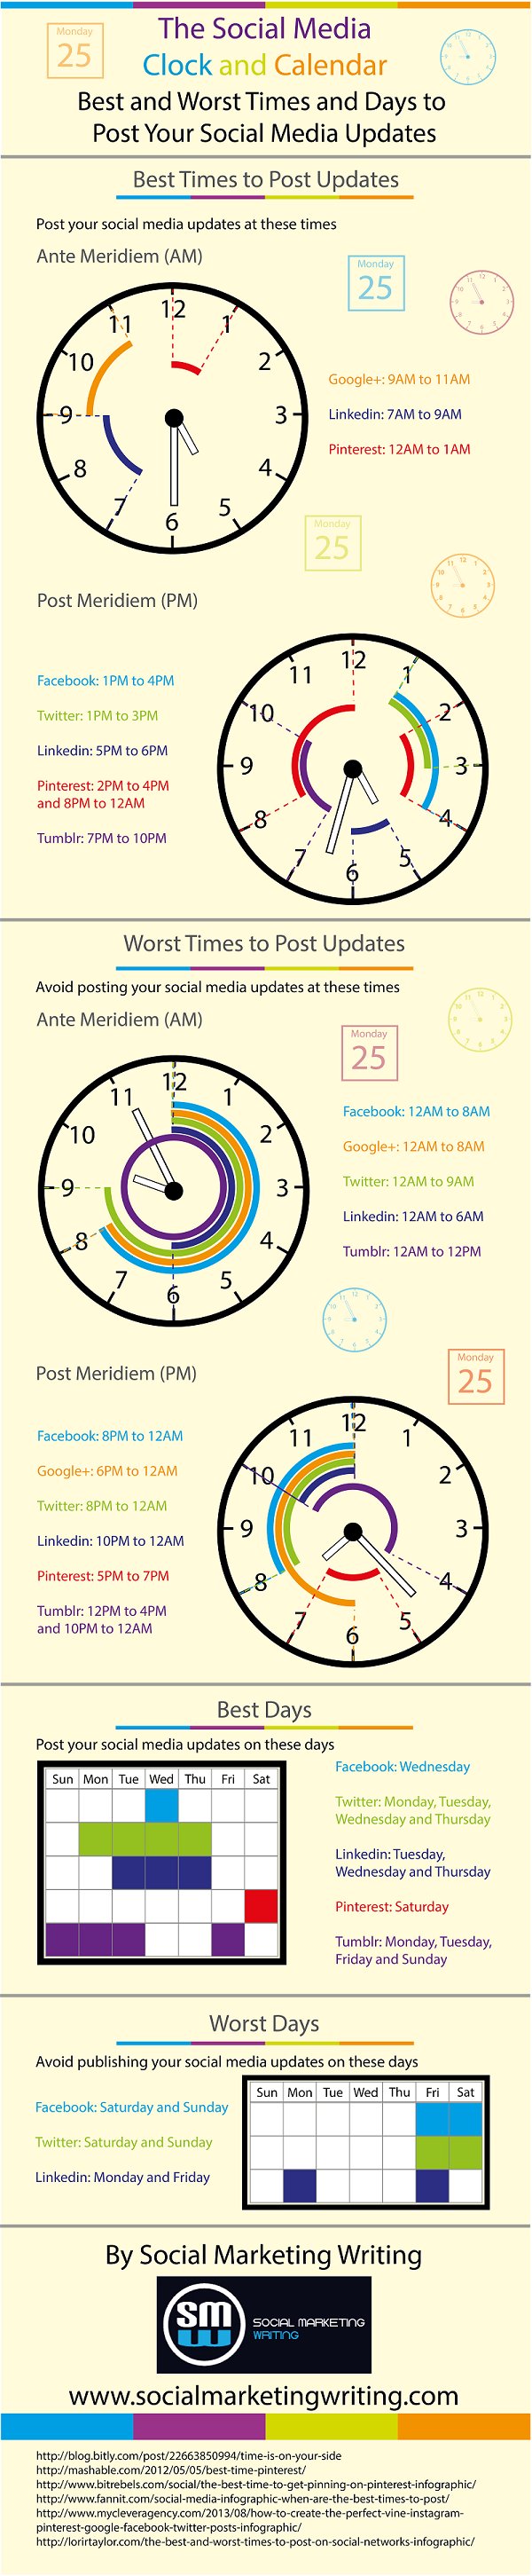 Best-and-Worst-Times-and-Days-to-Post-Your-Social-Media-Updates-Infographic-600